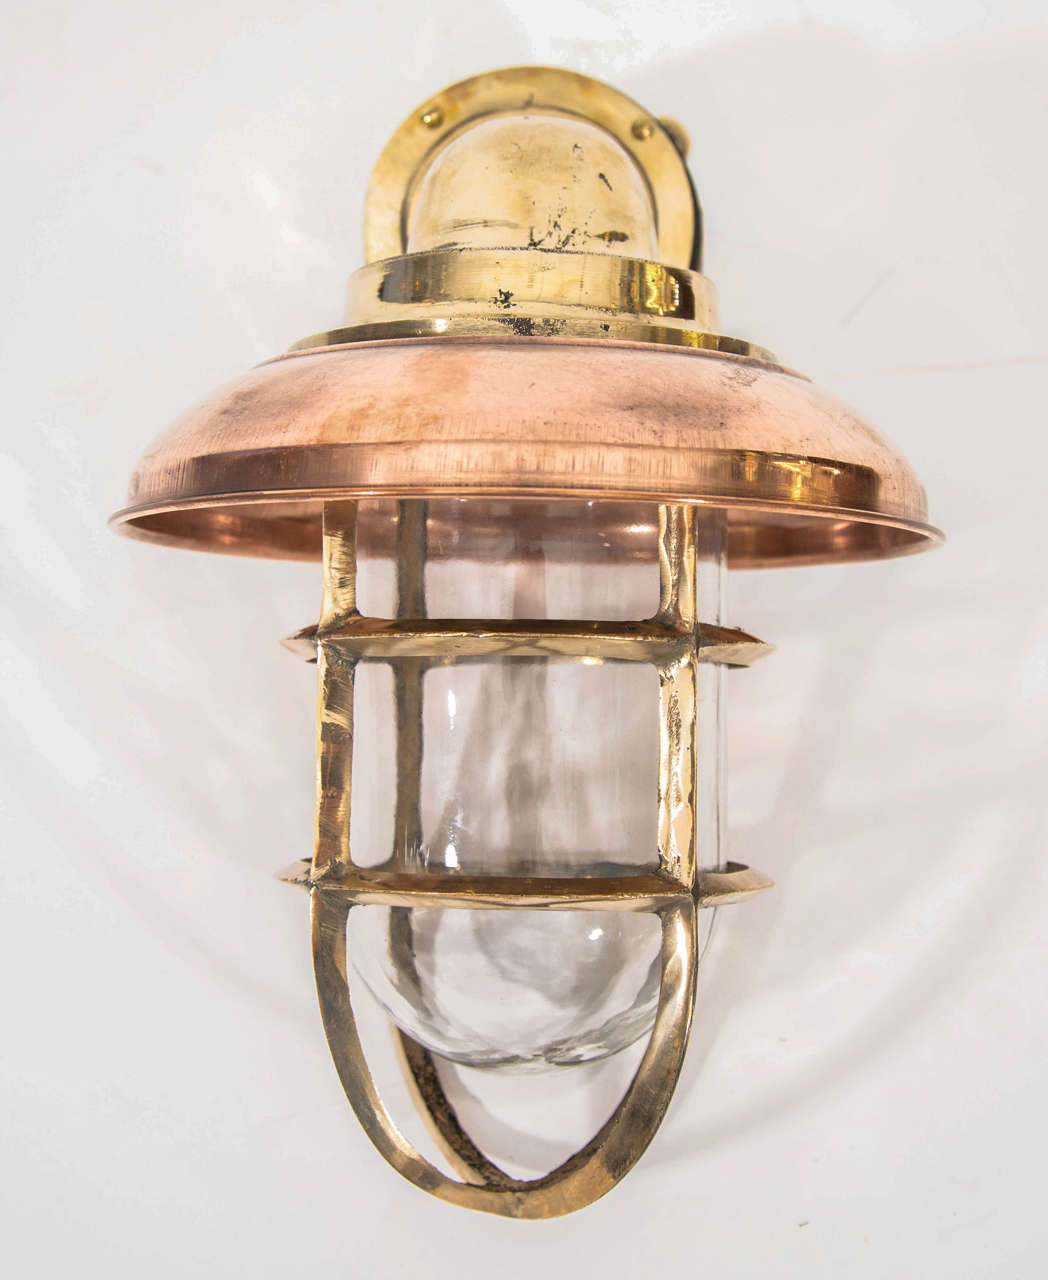 Copper and brass nautical sconces from a decommissioned Dutch naval vessel.
Re-wired and polished for indoor and outdoor use.